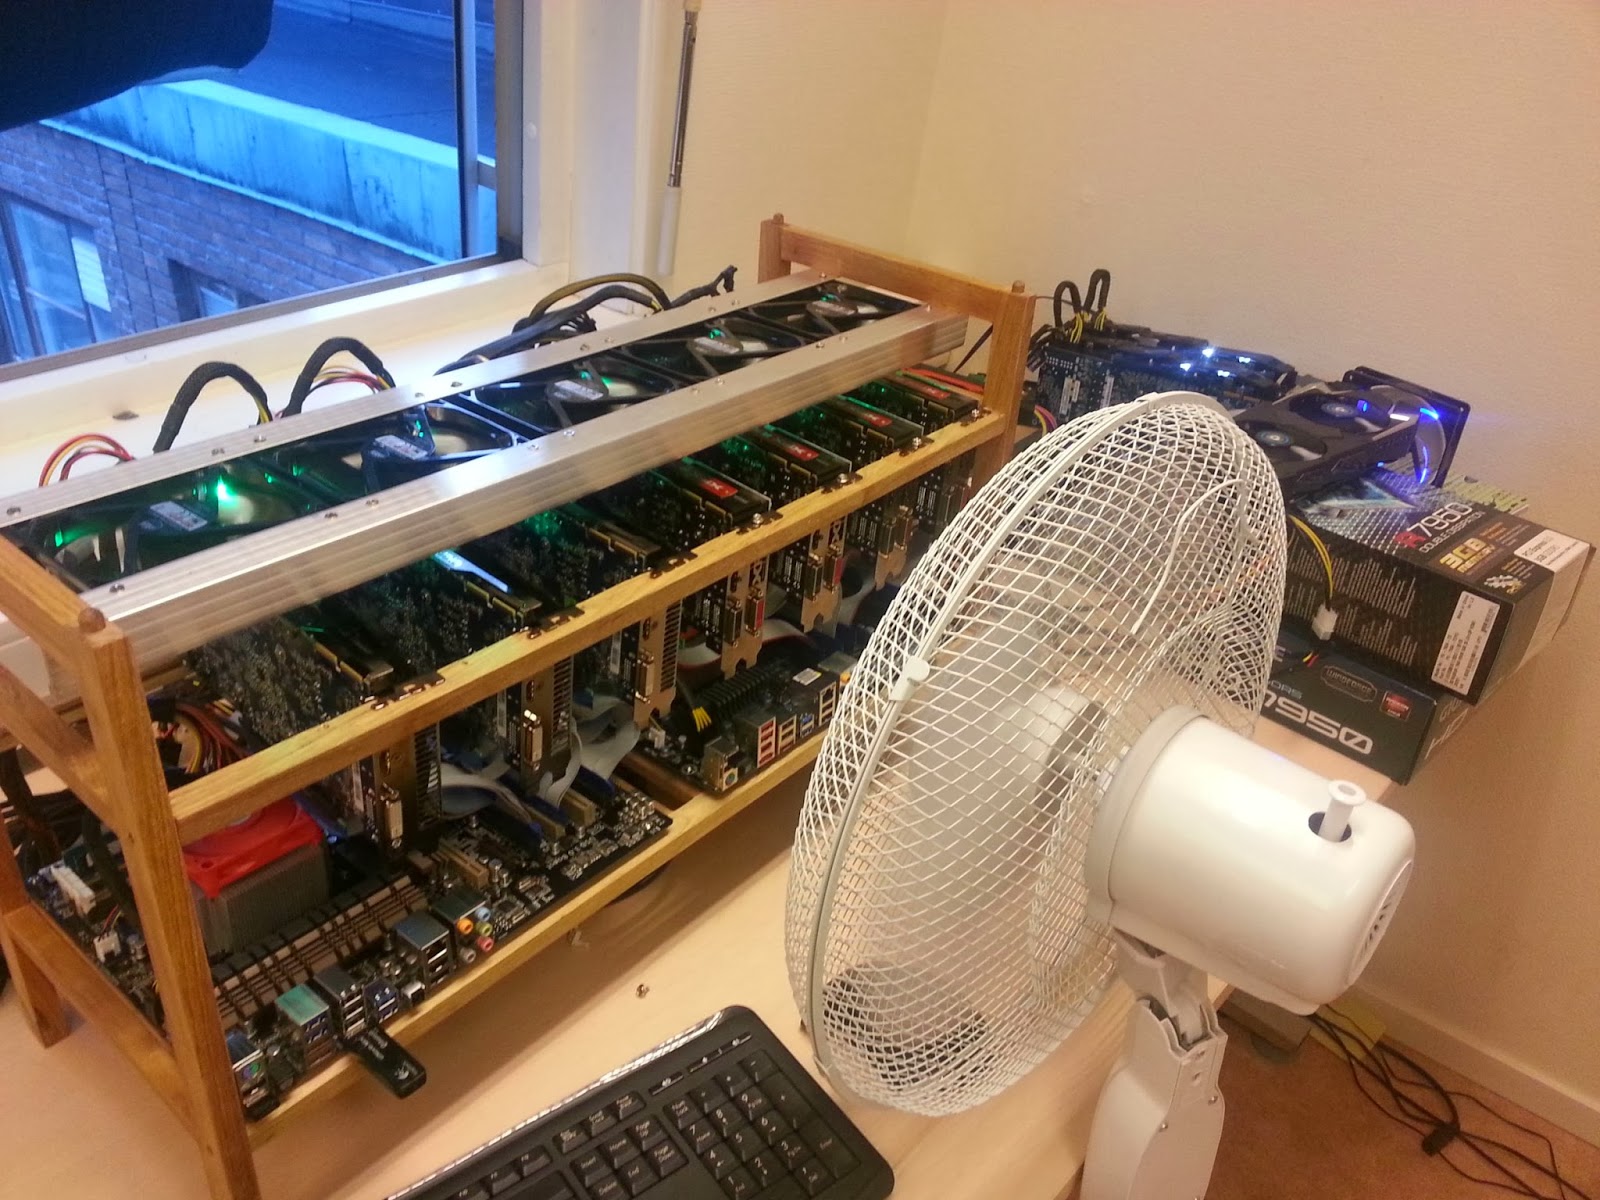 CRYPTOCURRENCY: HOW TO BUILD A BUDGET MINING RIG